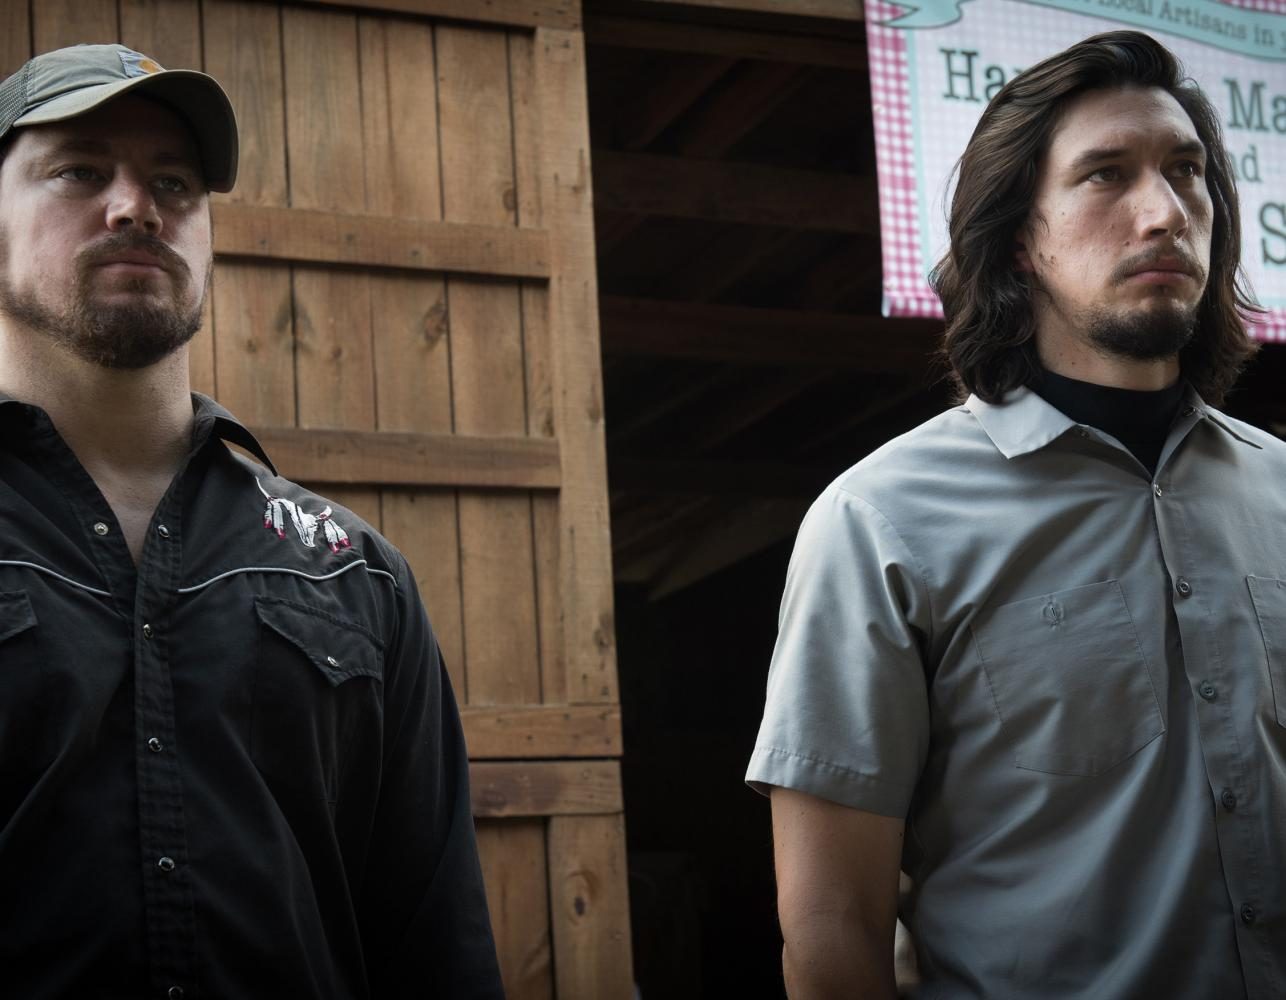 Logan Lucky, starring Channing Tatum (left) and Adam Driver (right), has received positive reviews from critics. It currently holds a 92 percent approval rating on Rotten Tomatoes.